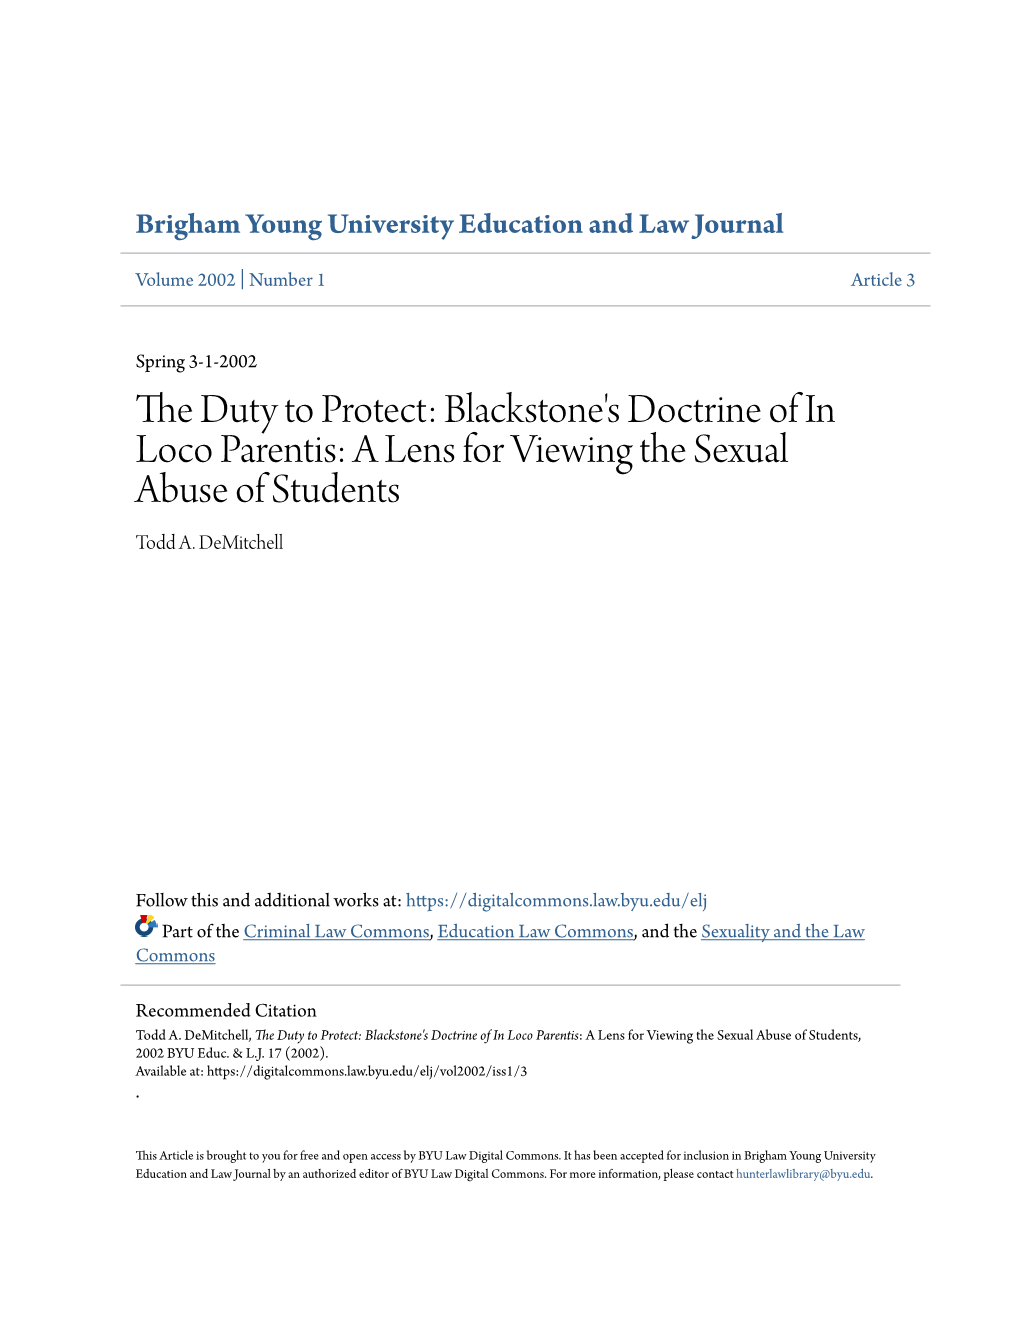 Blackstone's Doctrine of in Loco Parentis: a Lens for Viewing the Sexual Abuse of Students Todd A